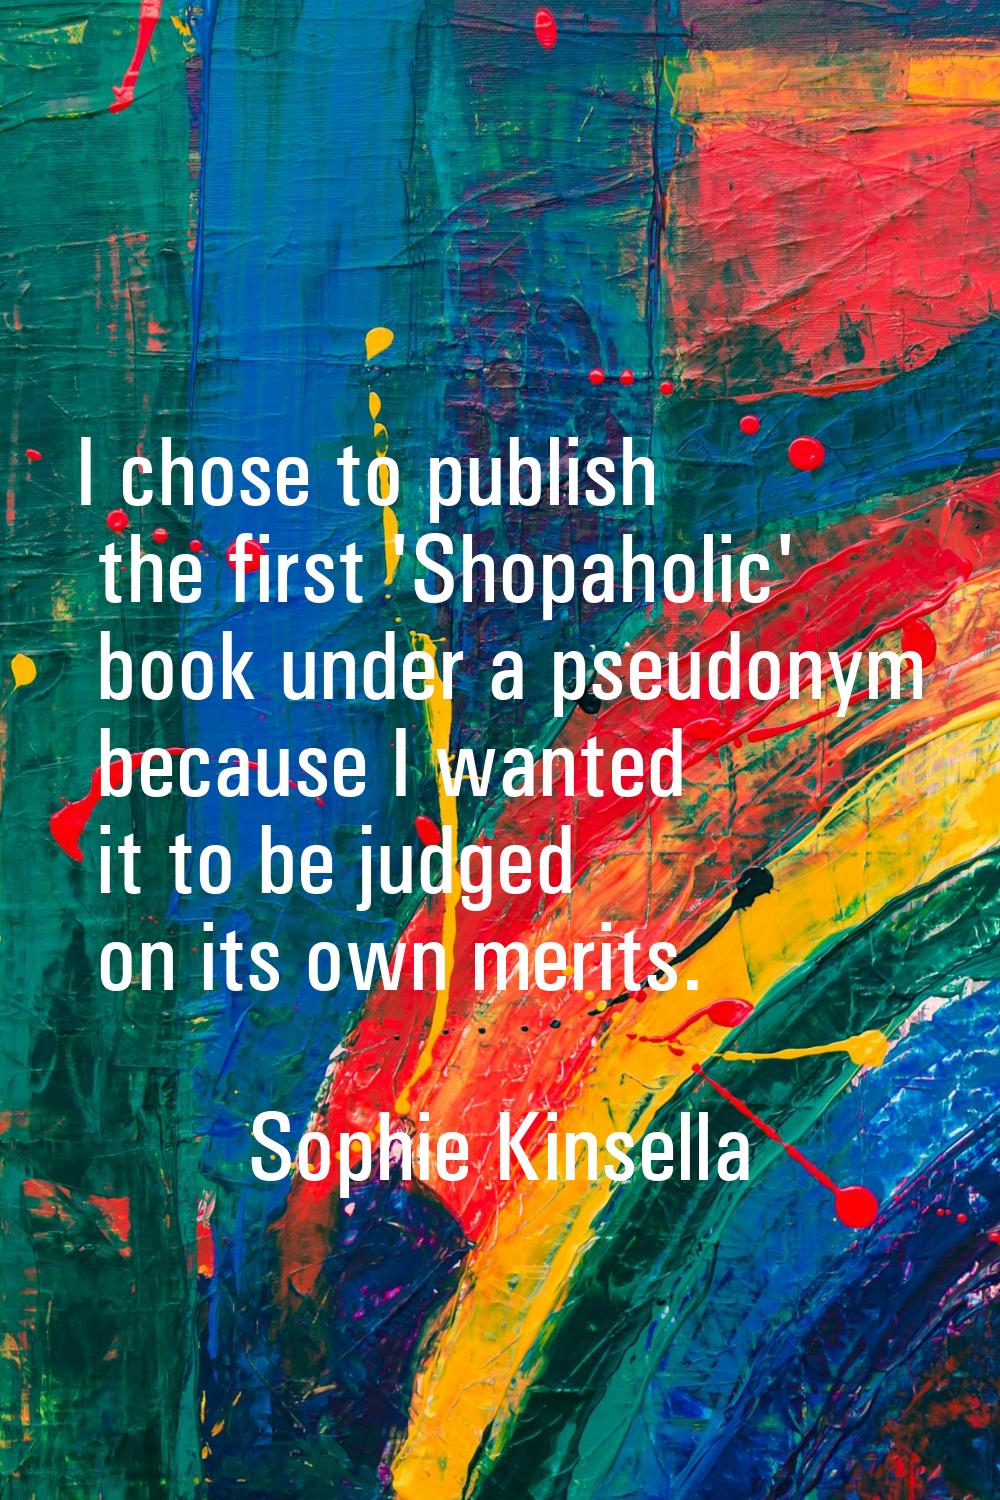 I chose to publish the first 'Shopaholic' book under a pseudonym because I wanted it to be judged o